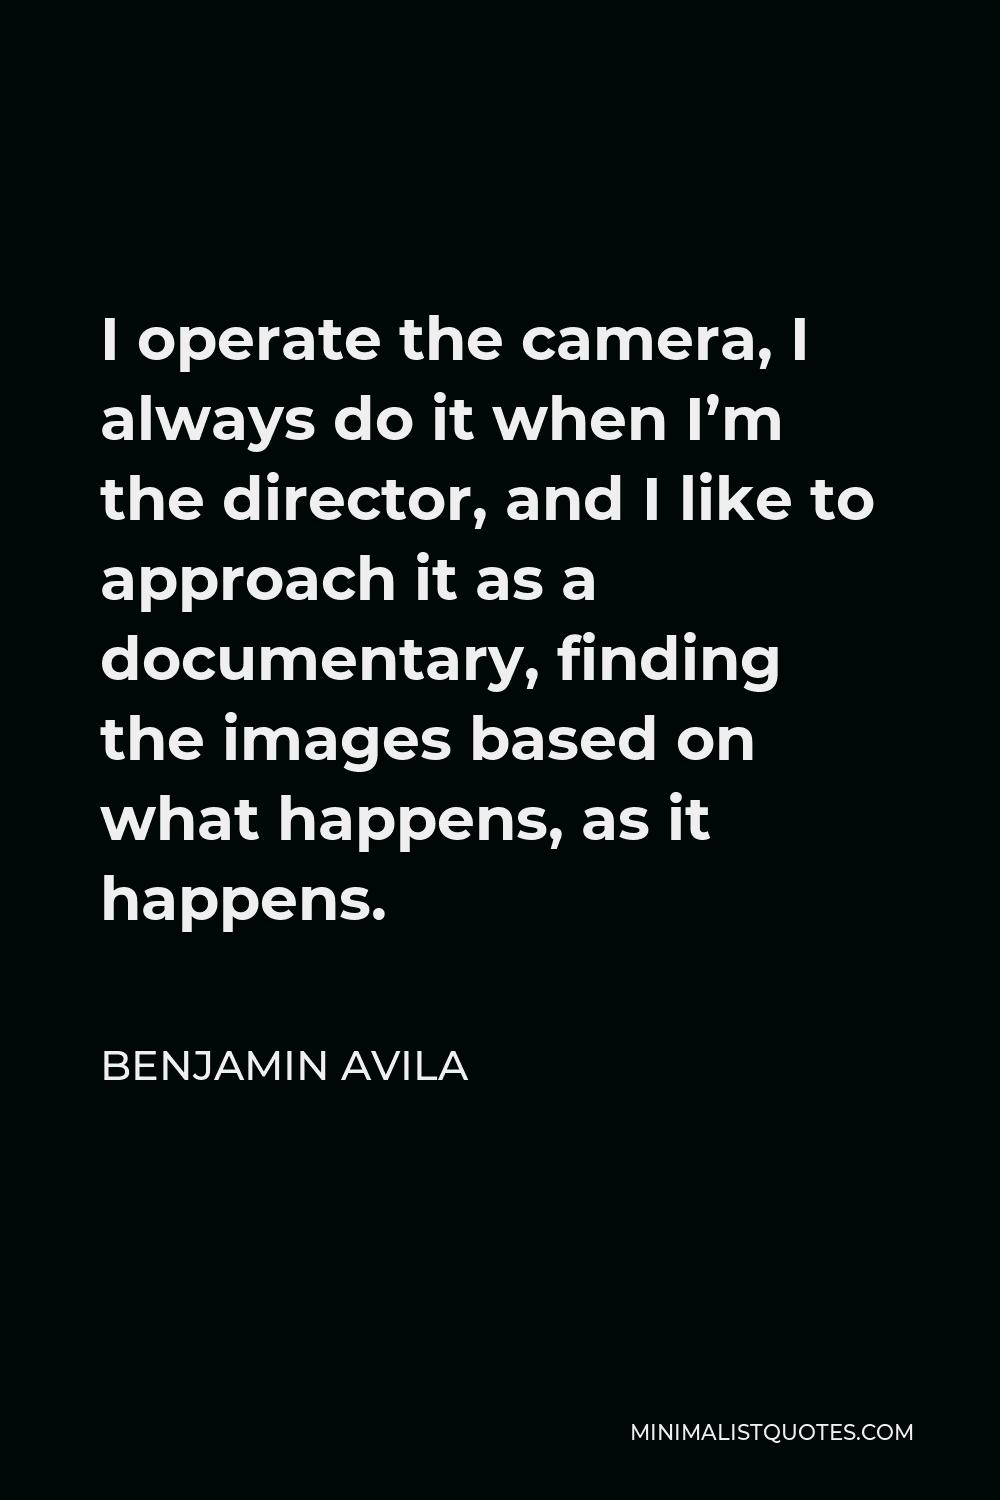 Benjamin Avila Quote - I operate the camera, I always do it when I’m the director, and I like to approach it as a documentary, finding the images based on what happens, as it happens.